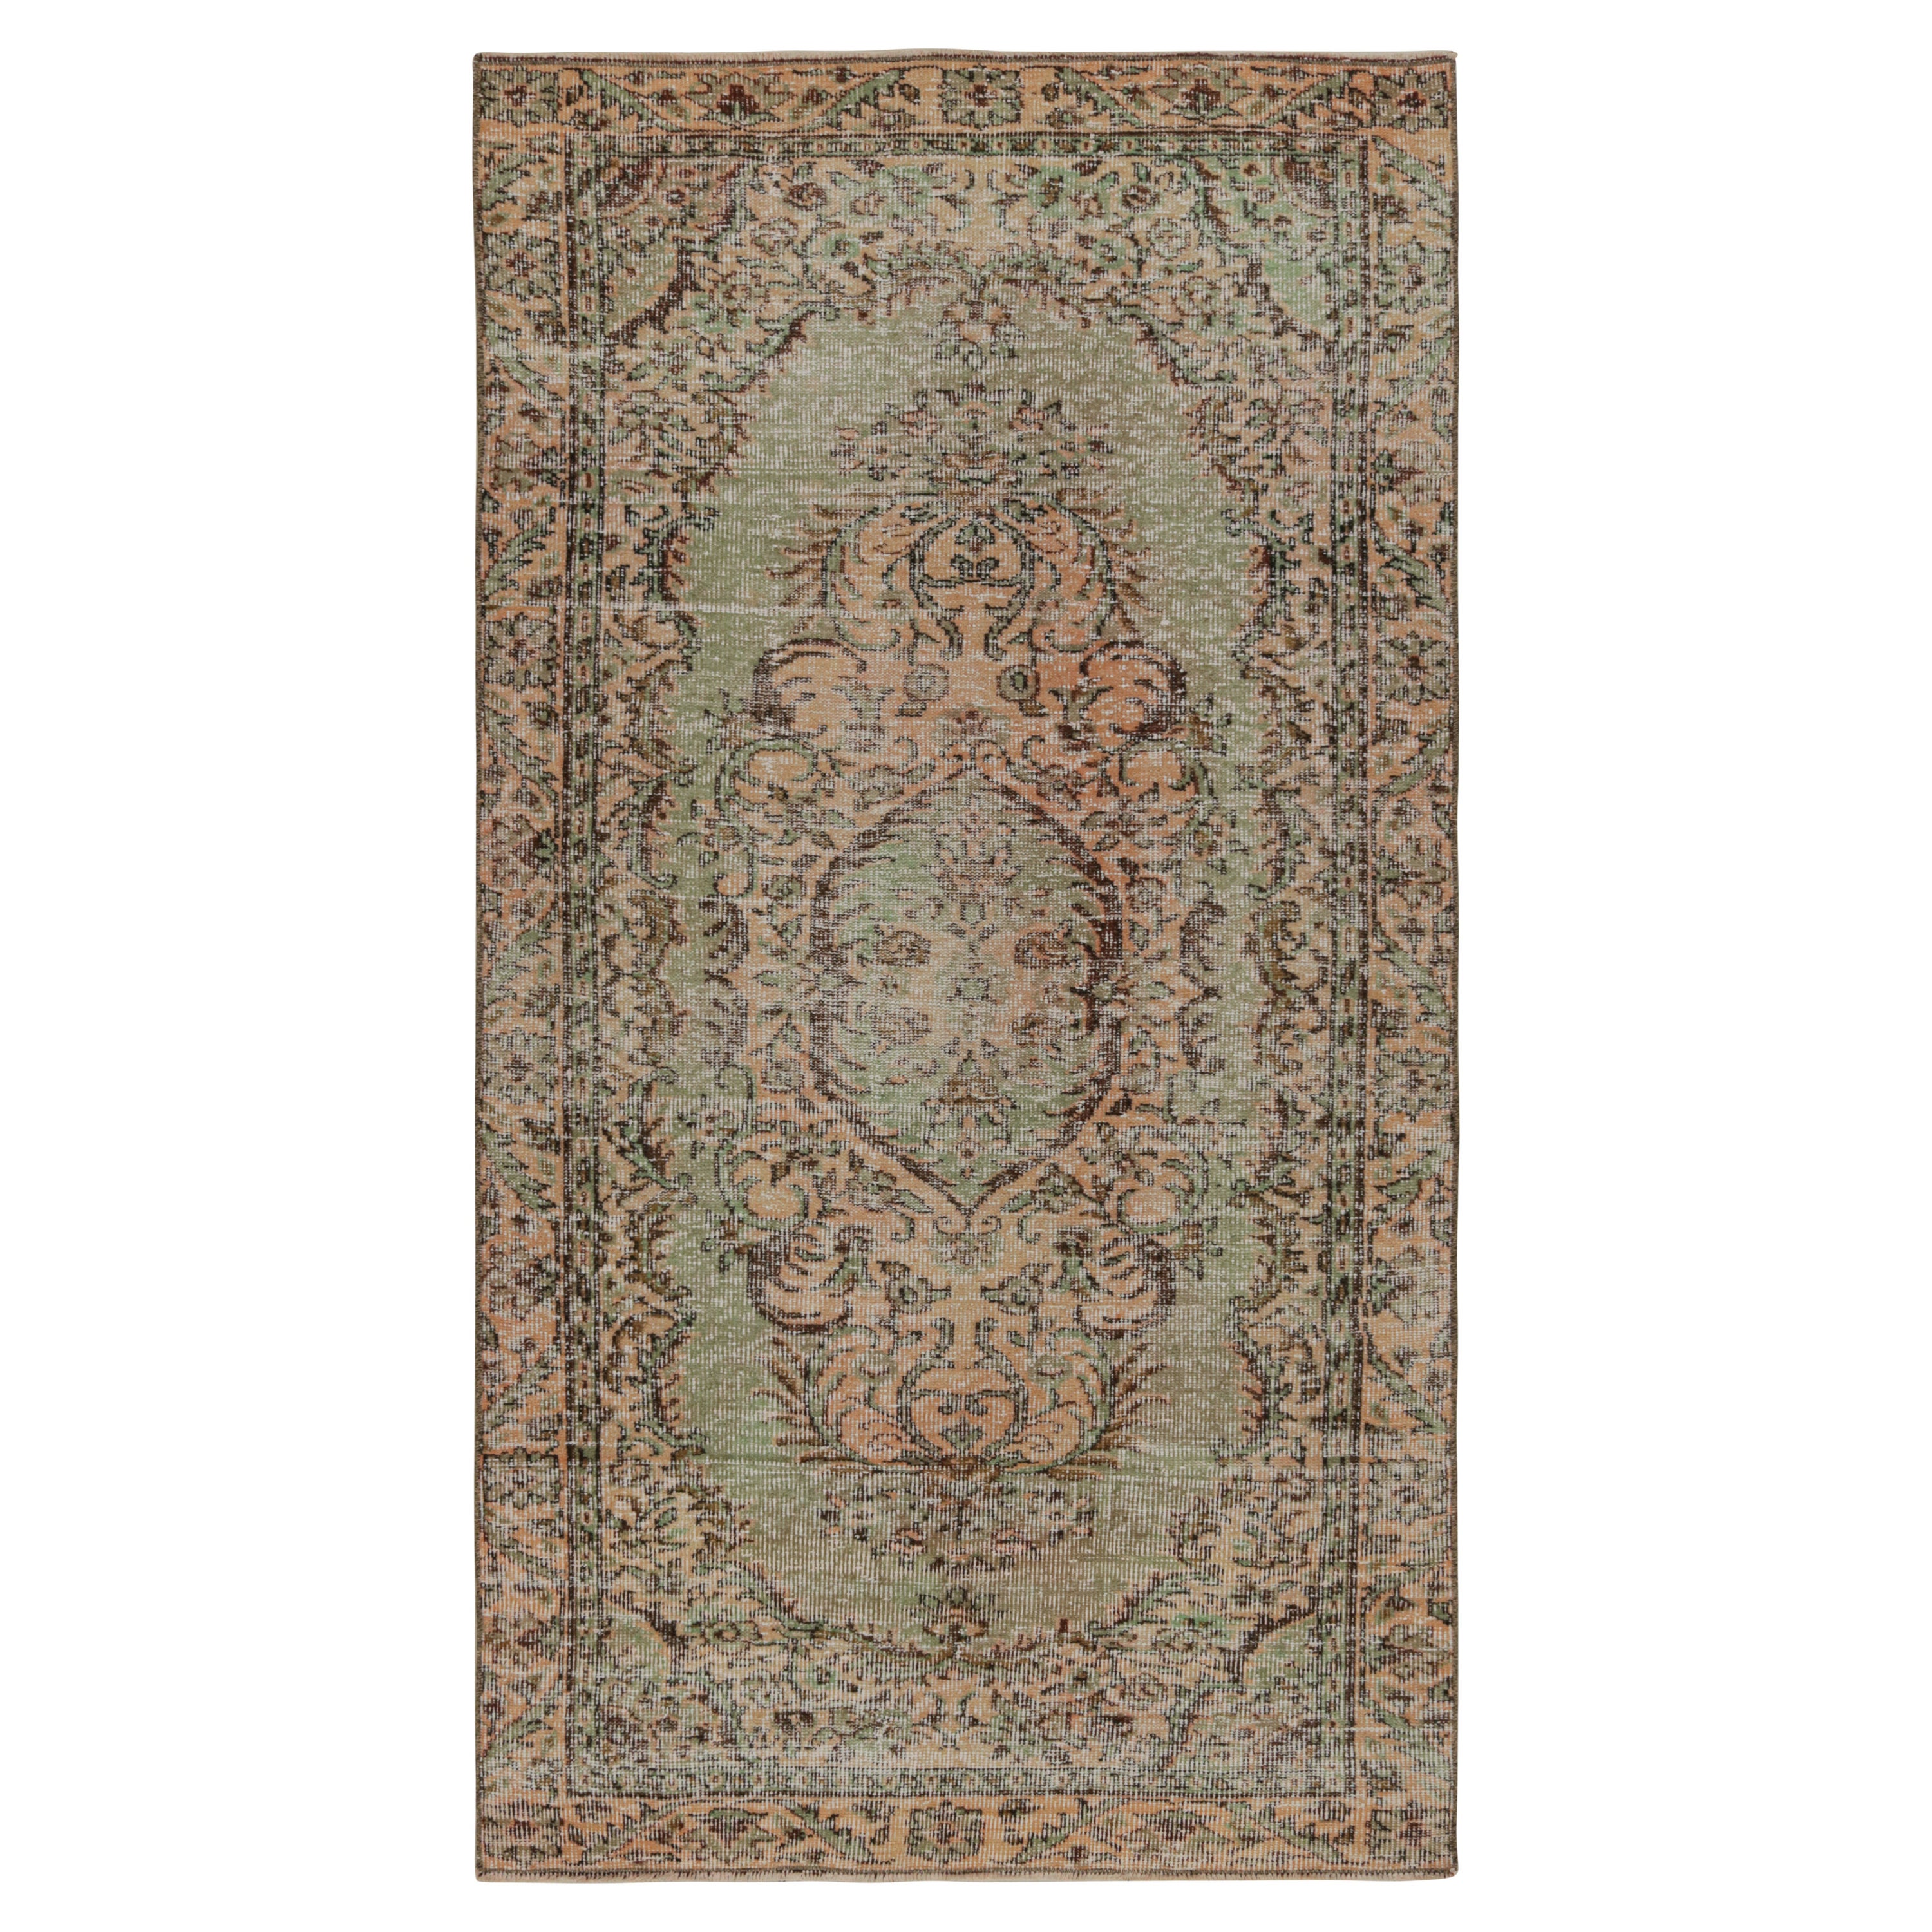 Vintage Zeki Müren Rug in Green and Salmon, with Floral Pattern from Rug & Kilim